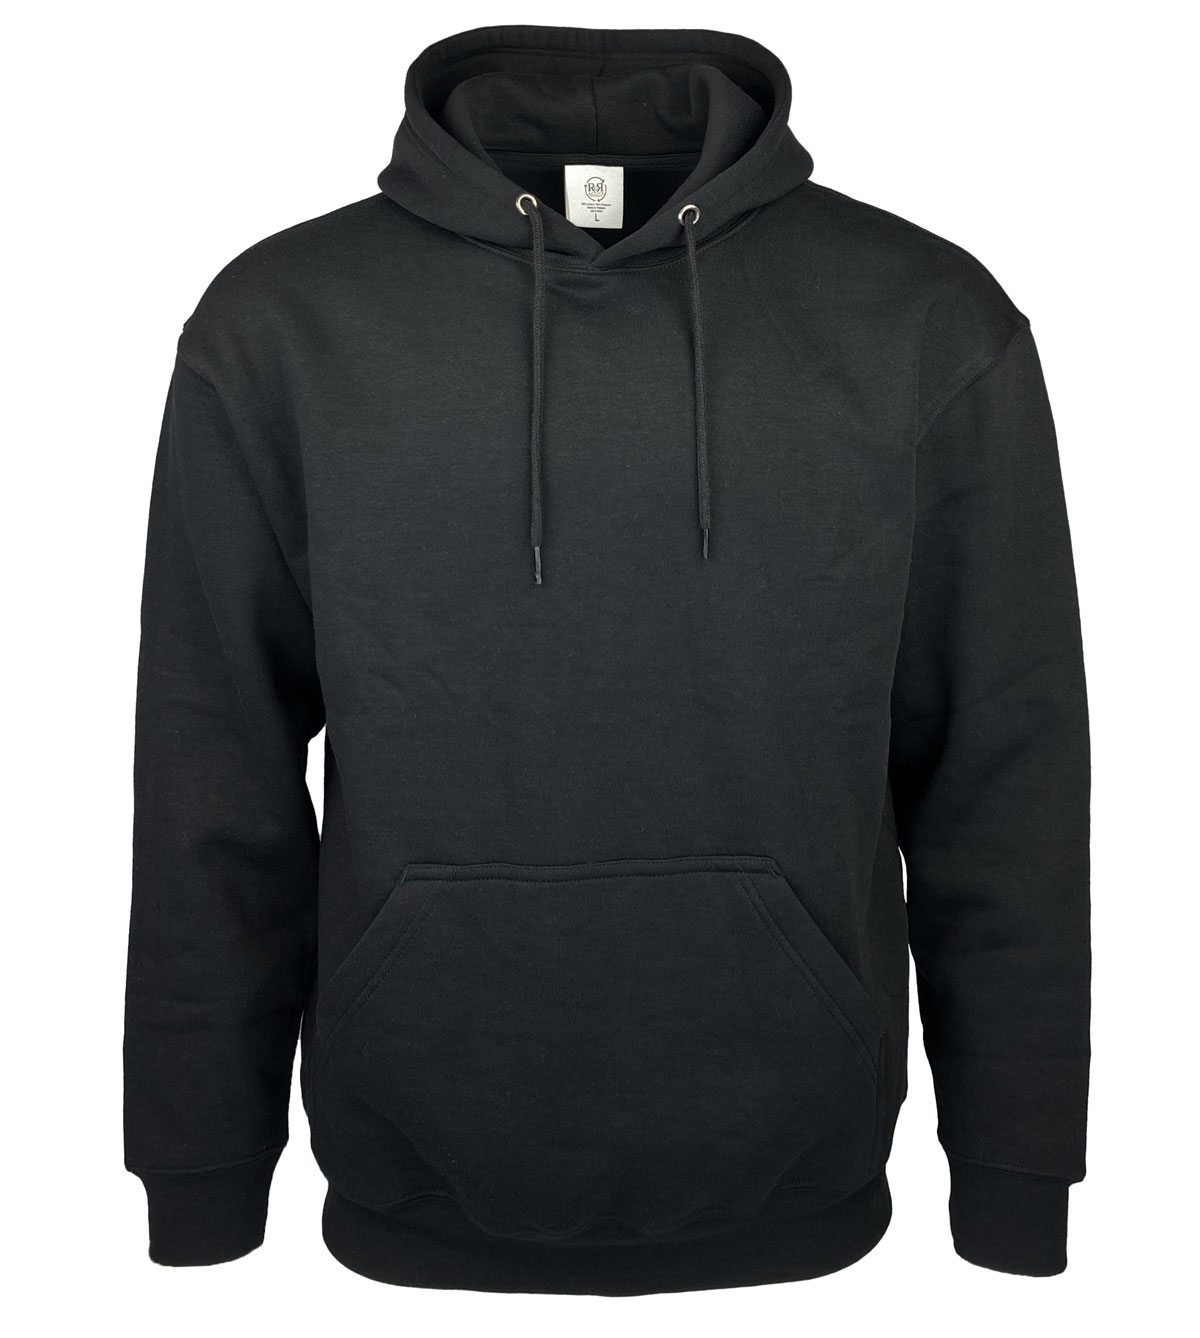 Black Pullover Hoodies-RG Riley Wholesale Off Price Clothing & Closeout ...